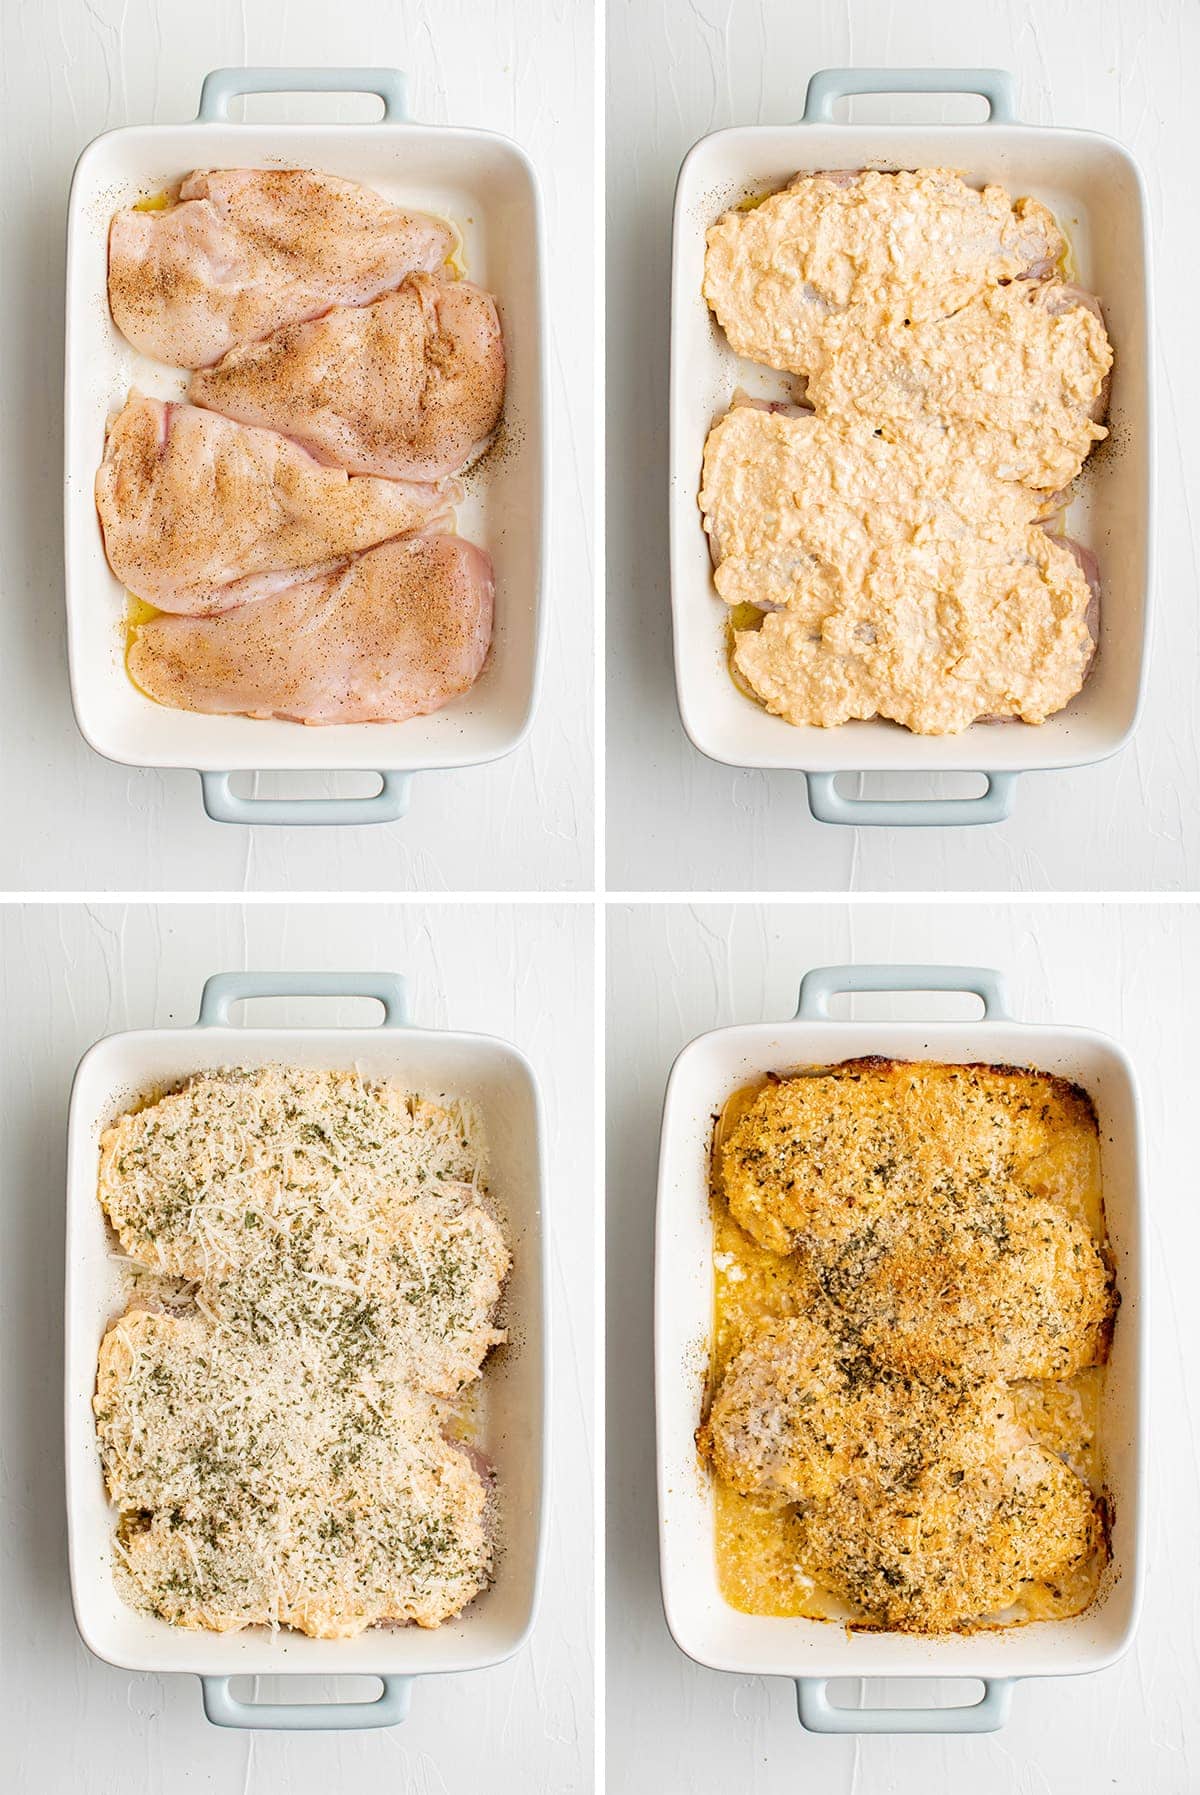 Collage showing steps for making creamy baked chicken